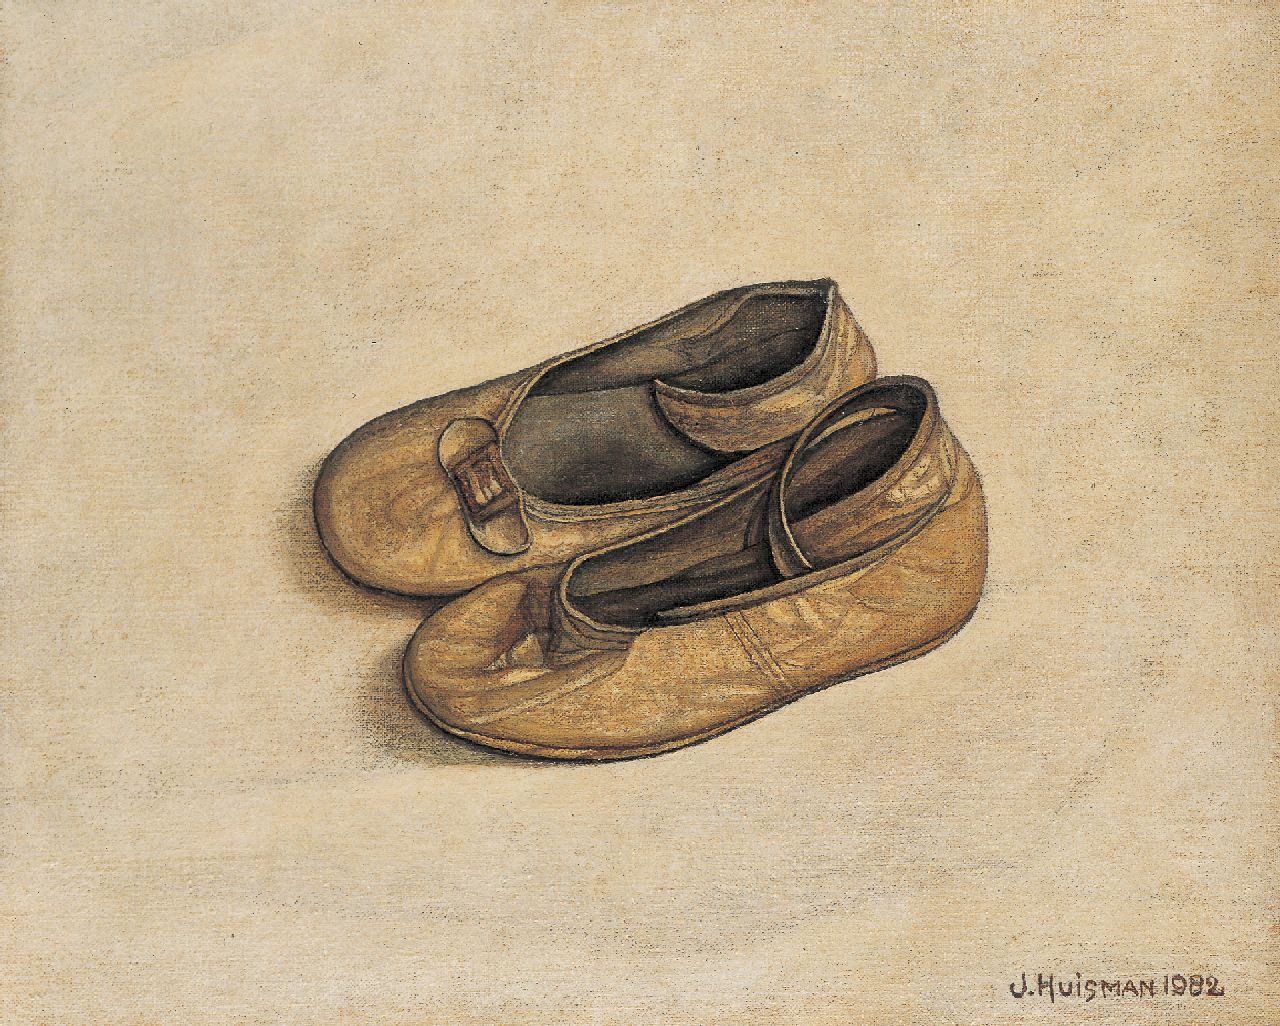 Huisman J.  | Jotje 'Jopie' Huisman, Shoes, oil on canvas 20.0 x 25.0 cm, signed l.r. and dated 1982